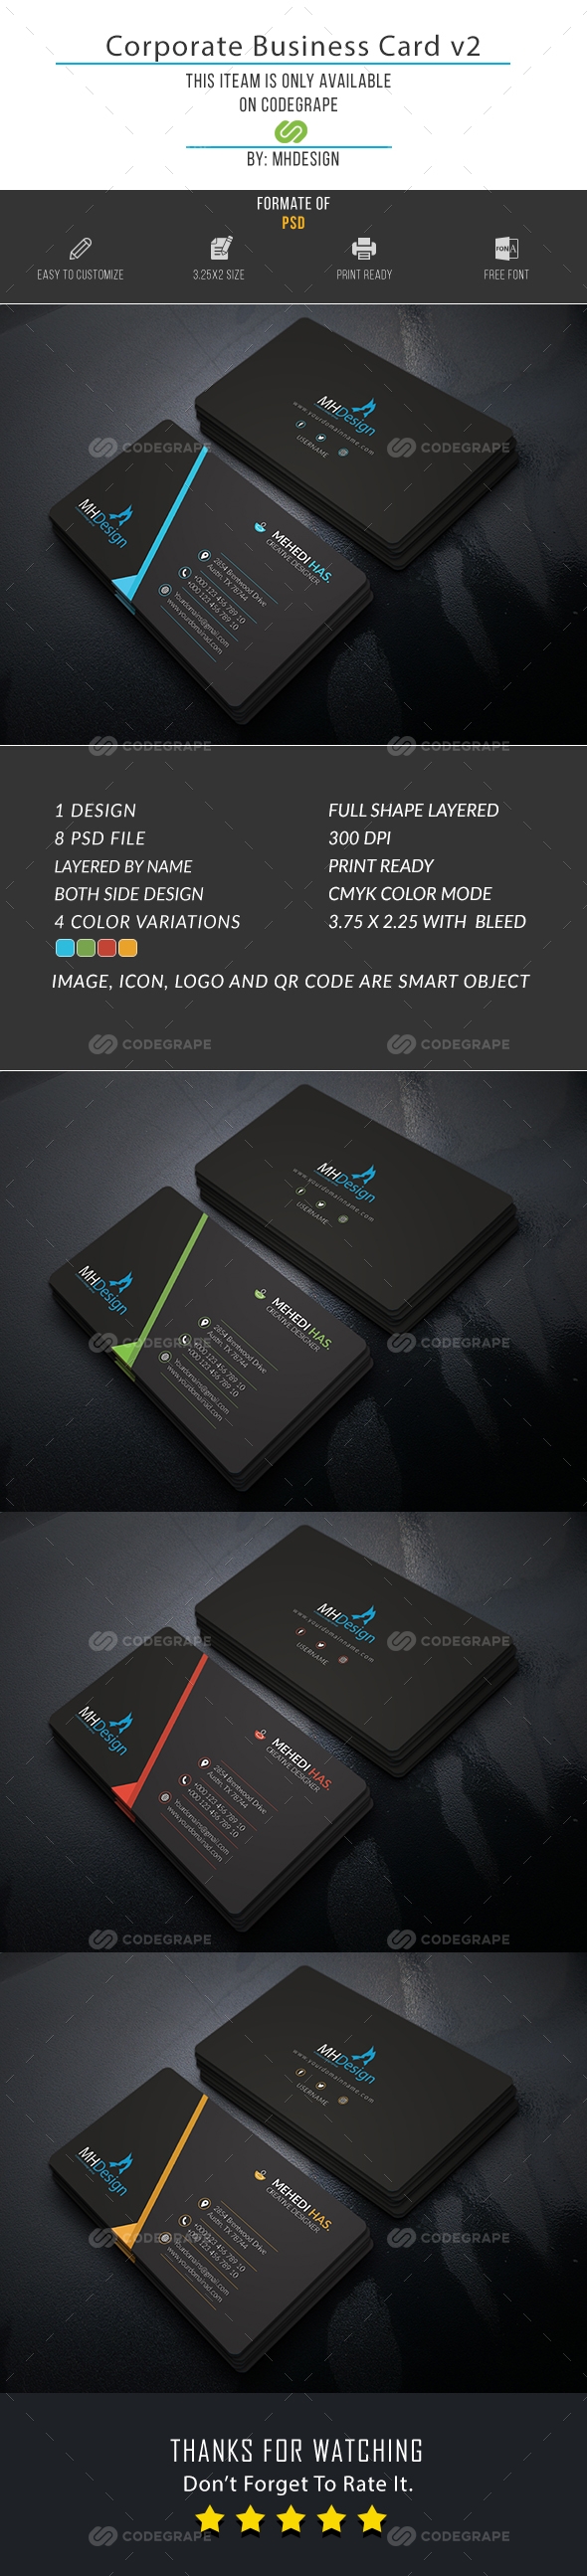 Corporate Business Card v2